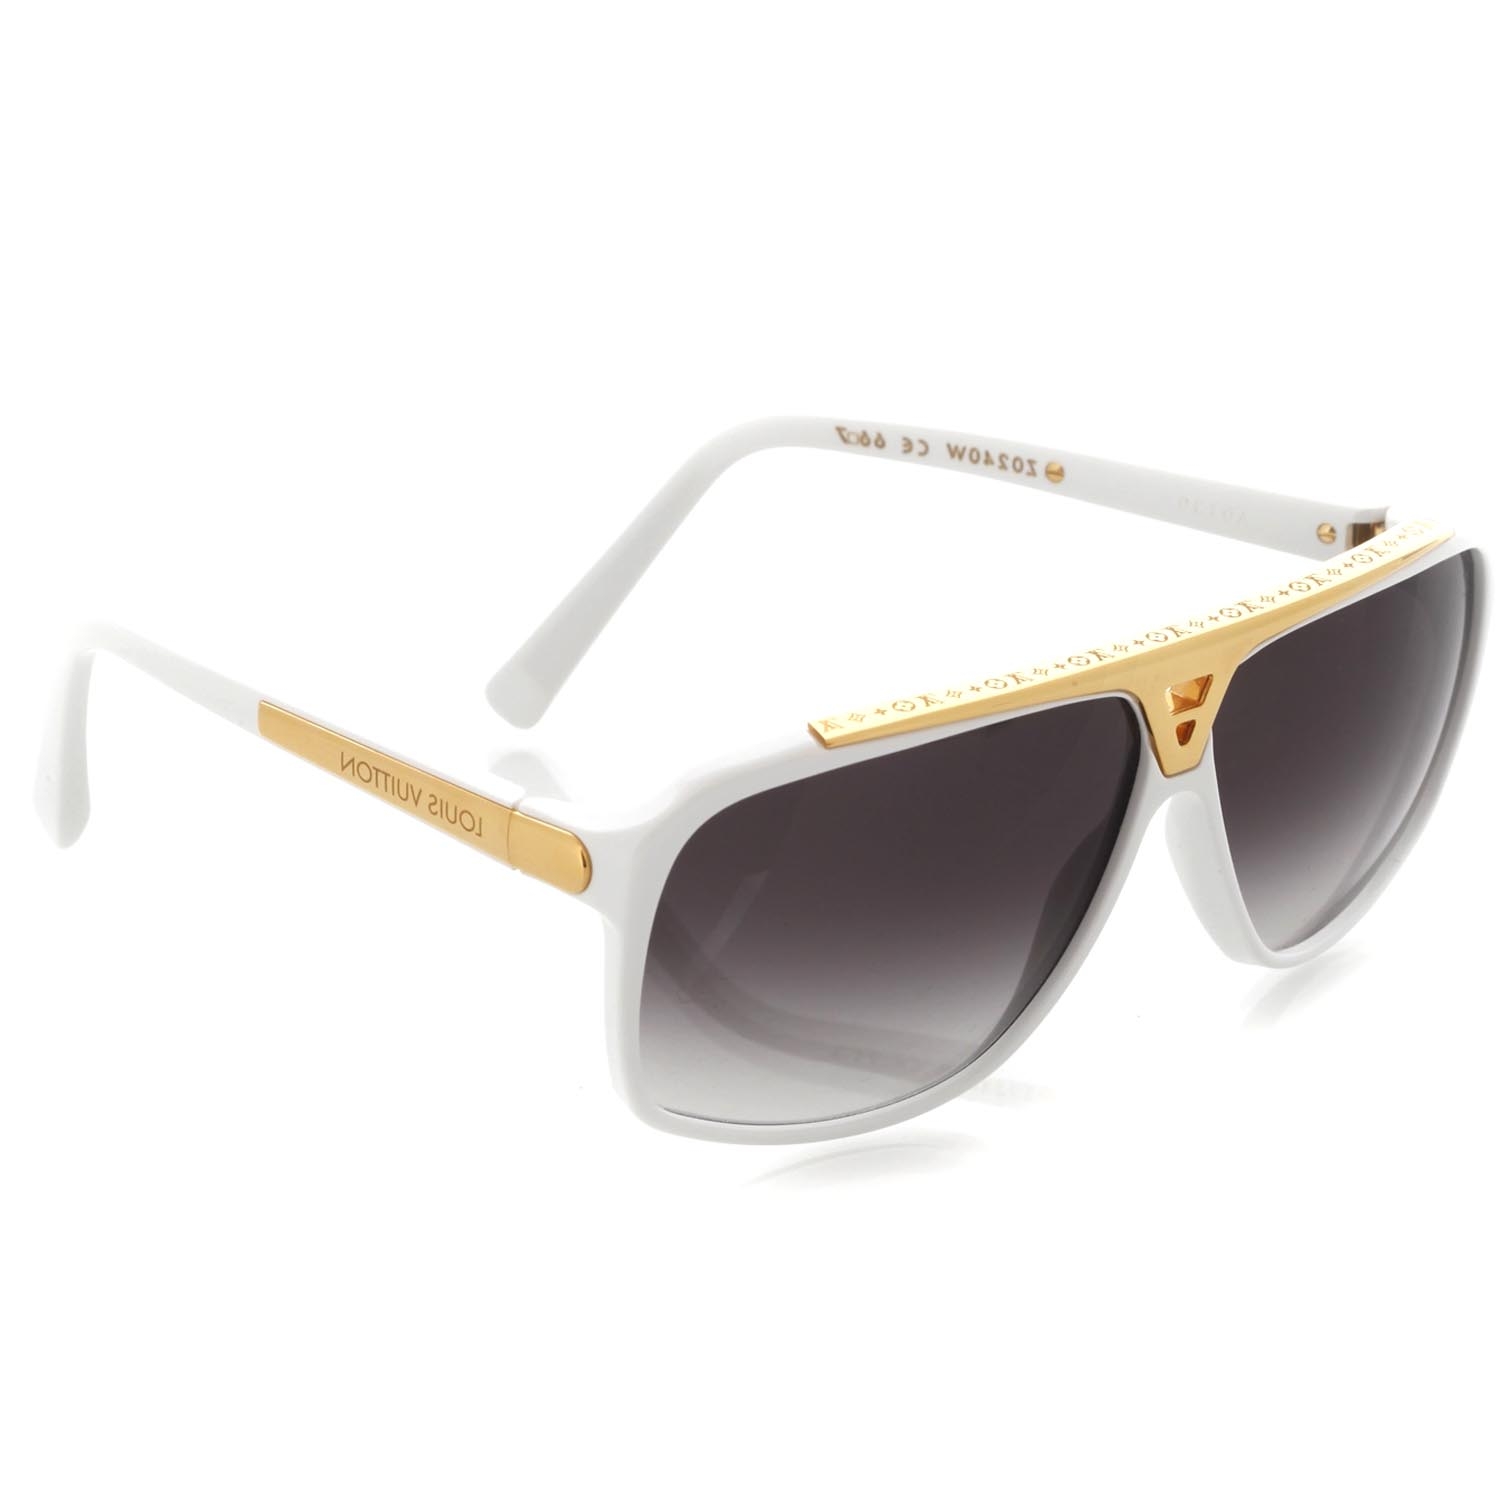 LOUIS VUITTON Evidence Sunglasses White Free 2 Reebok Watch In India - Shopclues Online